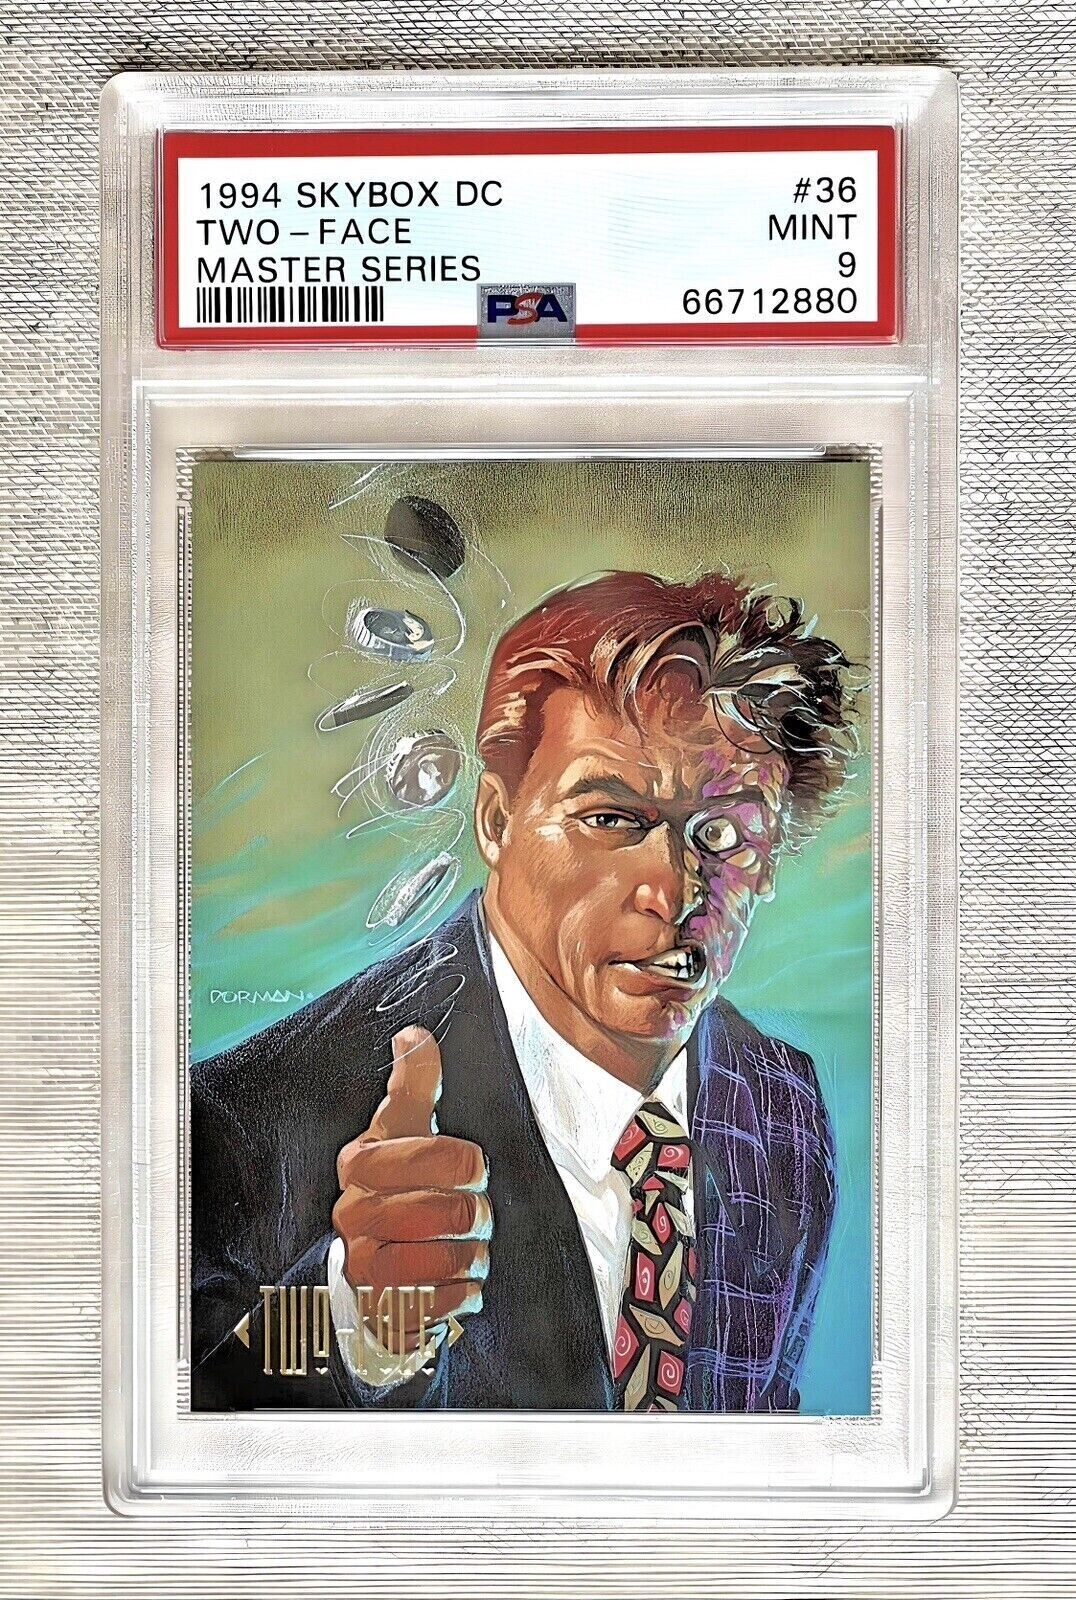 1994 SKYBOX DC MASTER SERIES TWO FACE #36 COMIC ARTS PSA 9